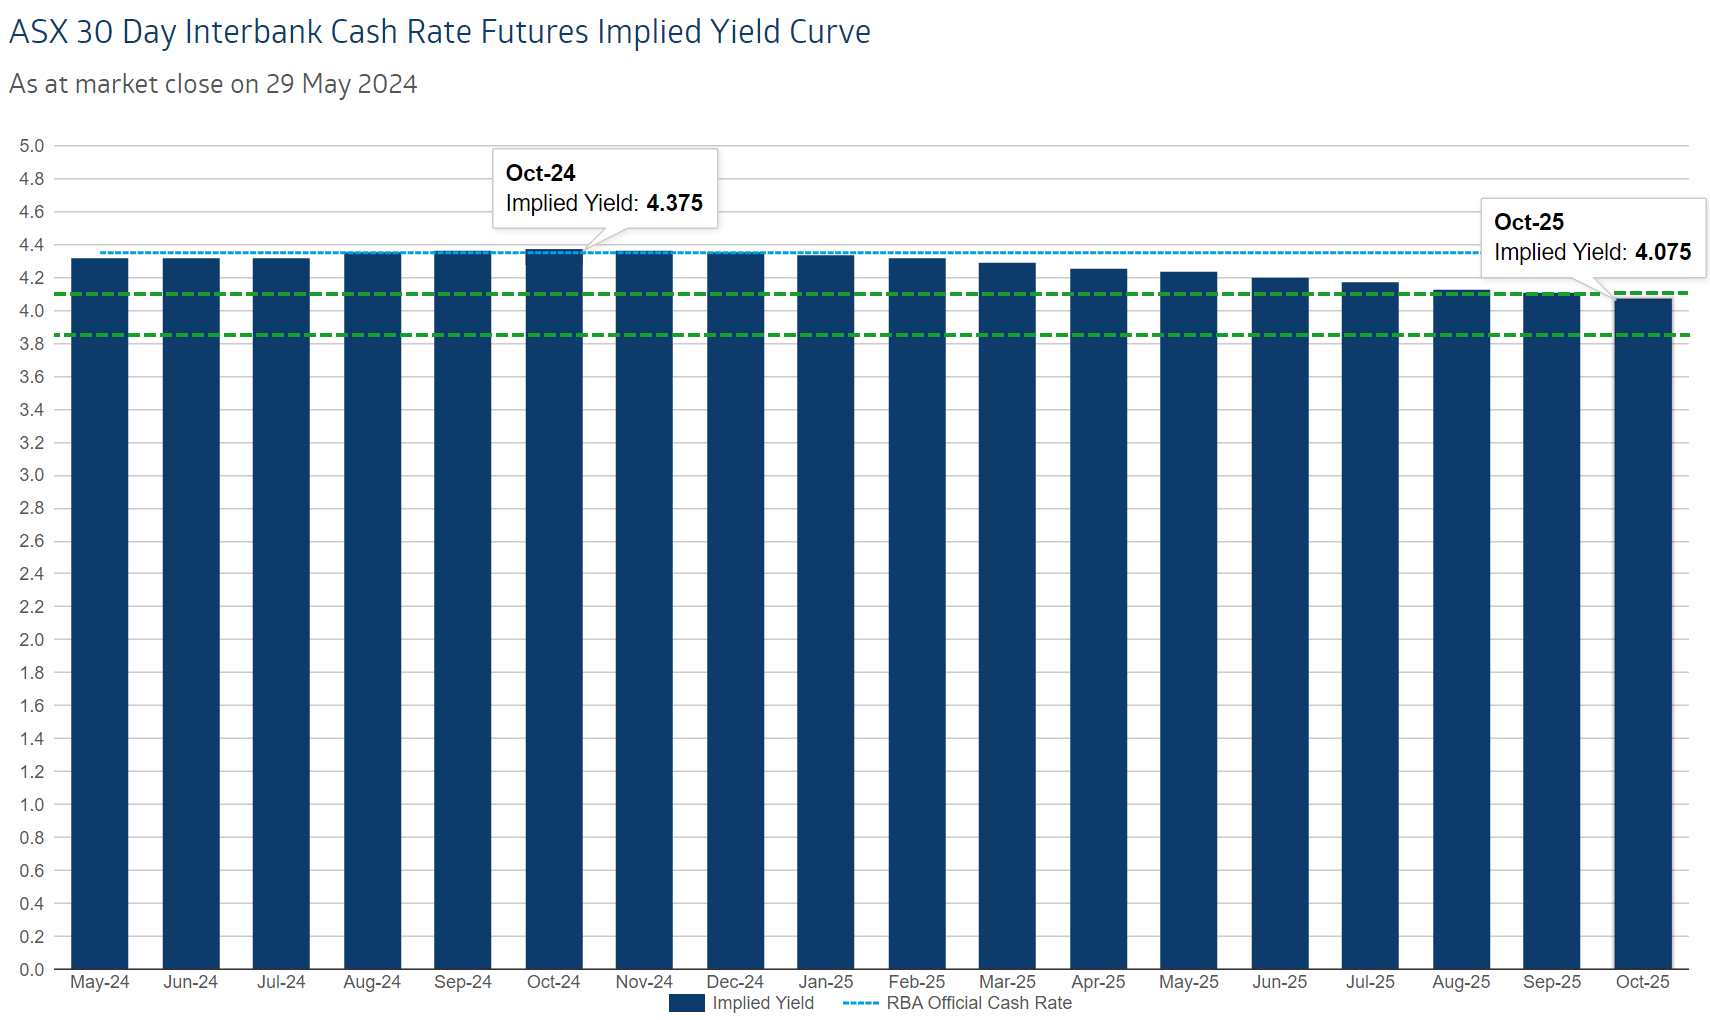 ASX 30 Day Interbank Cash Rate Futures Implied Yield Curve as at market close on 29 May. Source: ASX